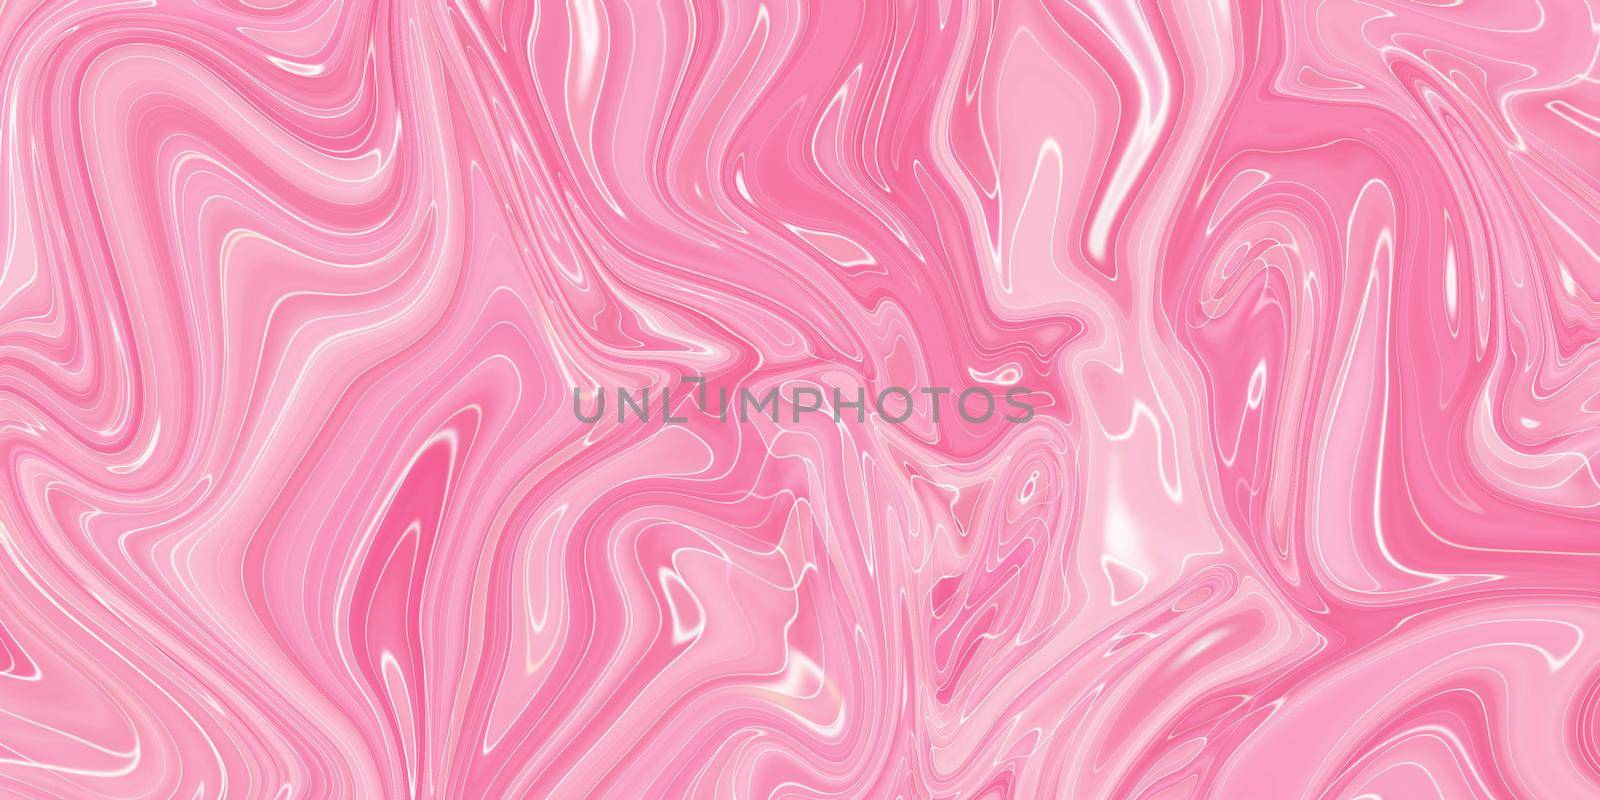 Swirls of marble or the ripples of agate. Liquid marble texture with pink colors. Abstract painting background for wallpapers, posters, cards, invitations, websites. Fluid art by Benzoix